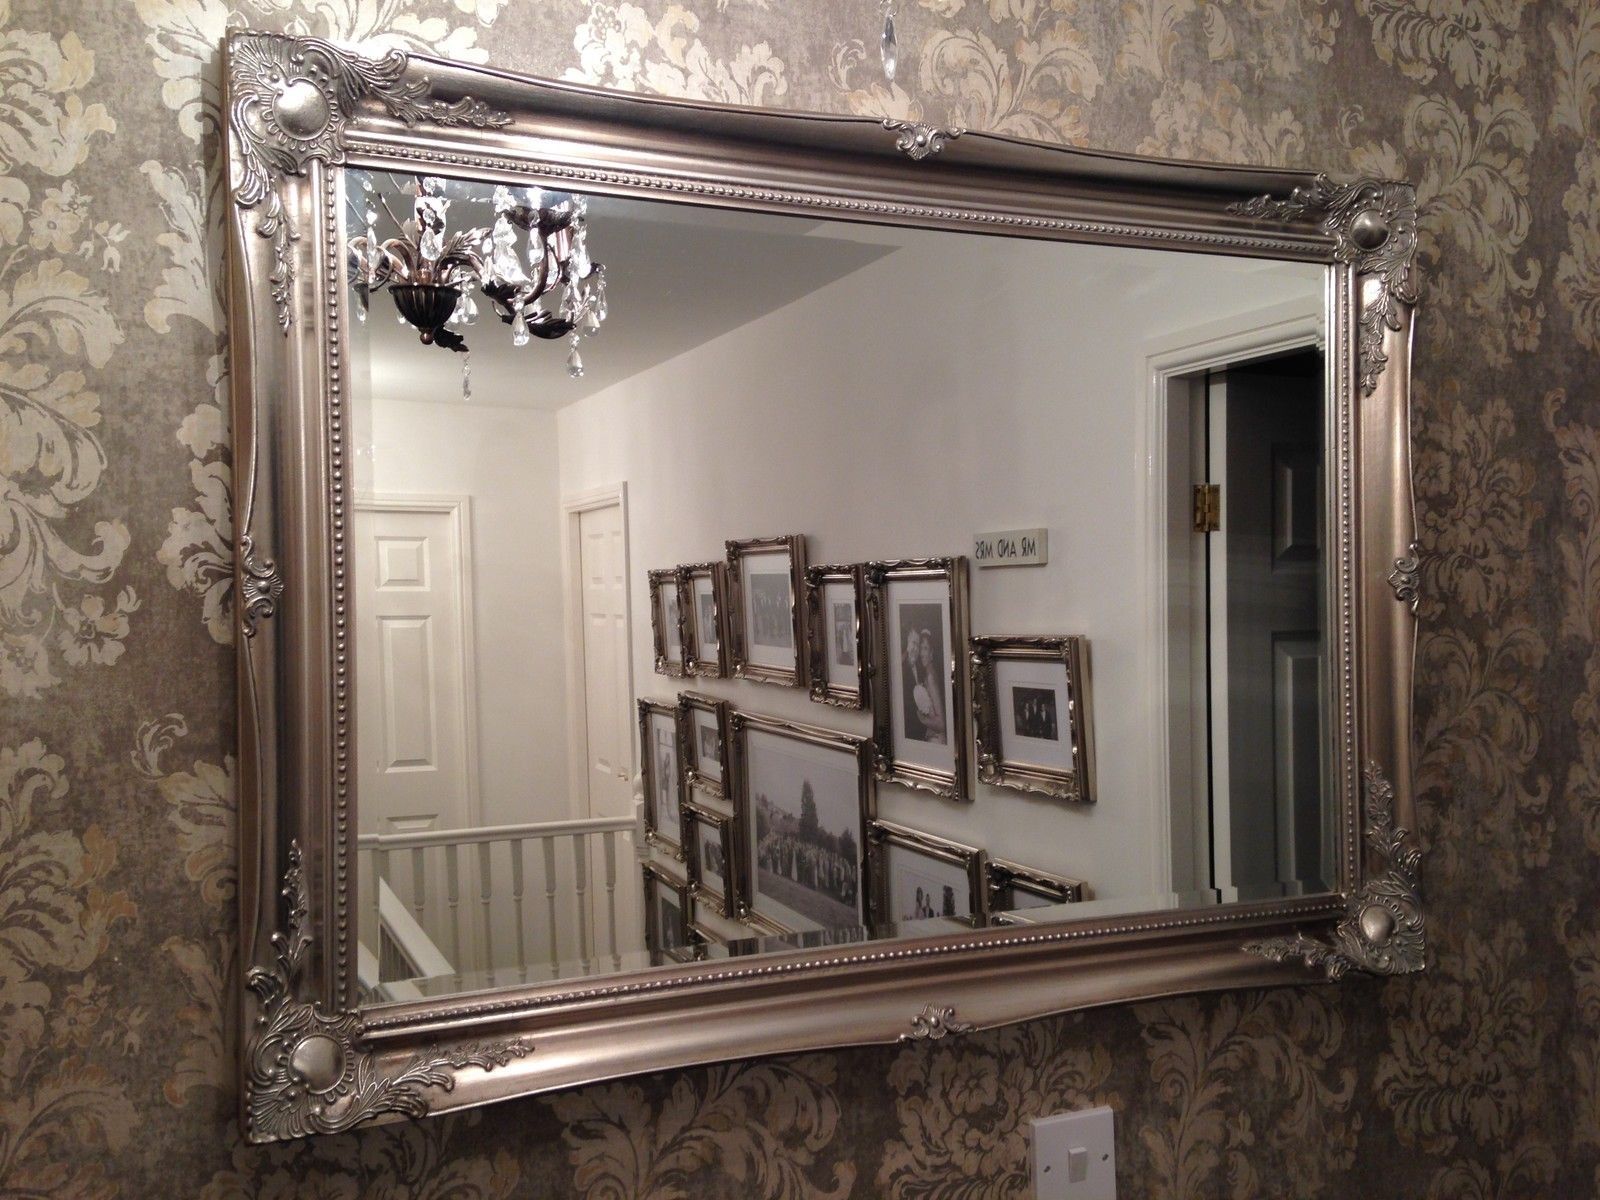 Delightful Ideas Large Decorative Wall Mirrors Tremendous Long Inside Decorative Long Mirrors (View 13 of 15)